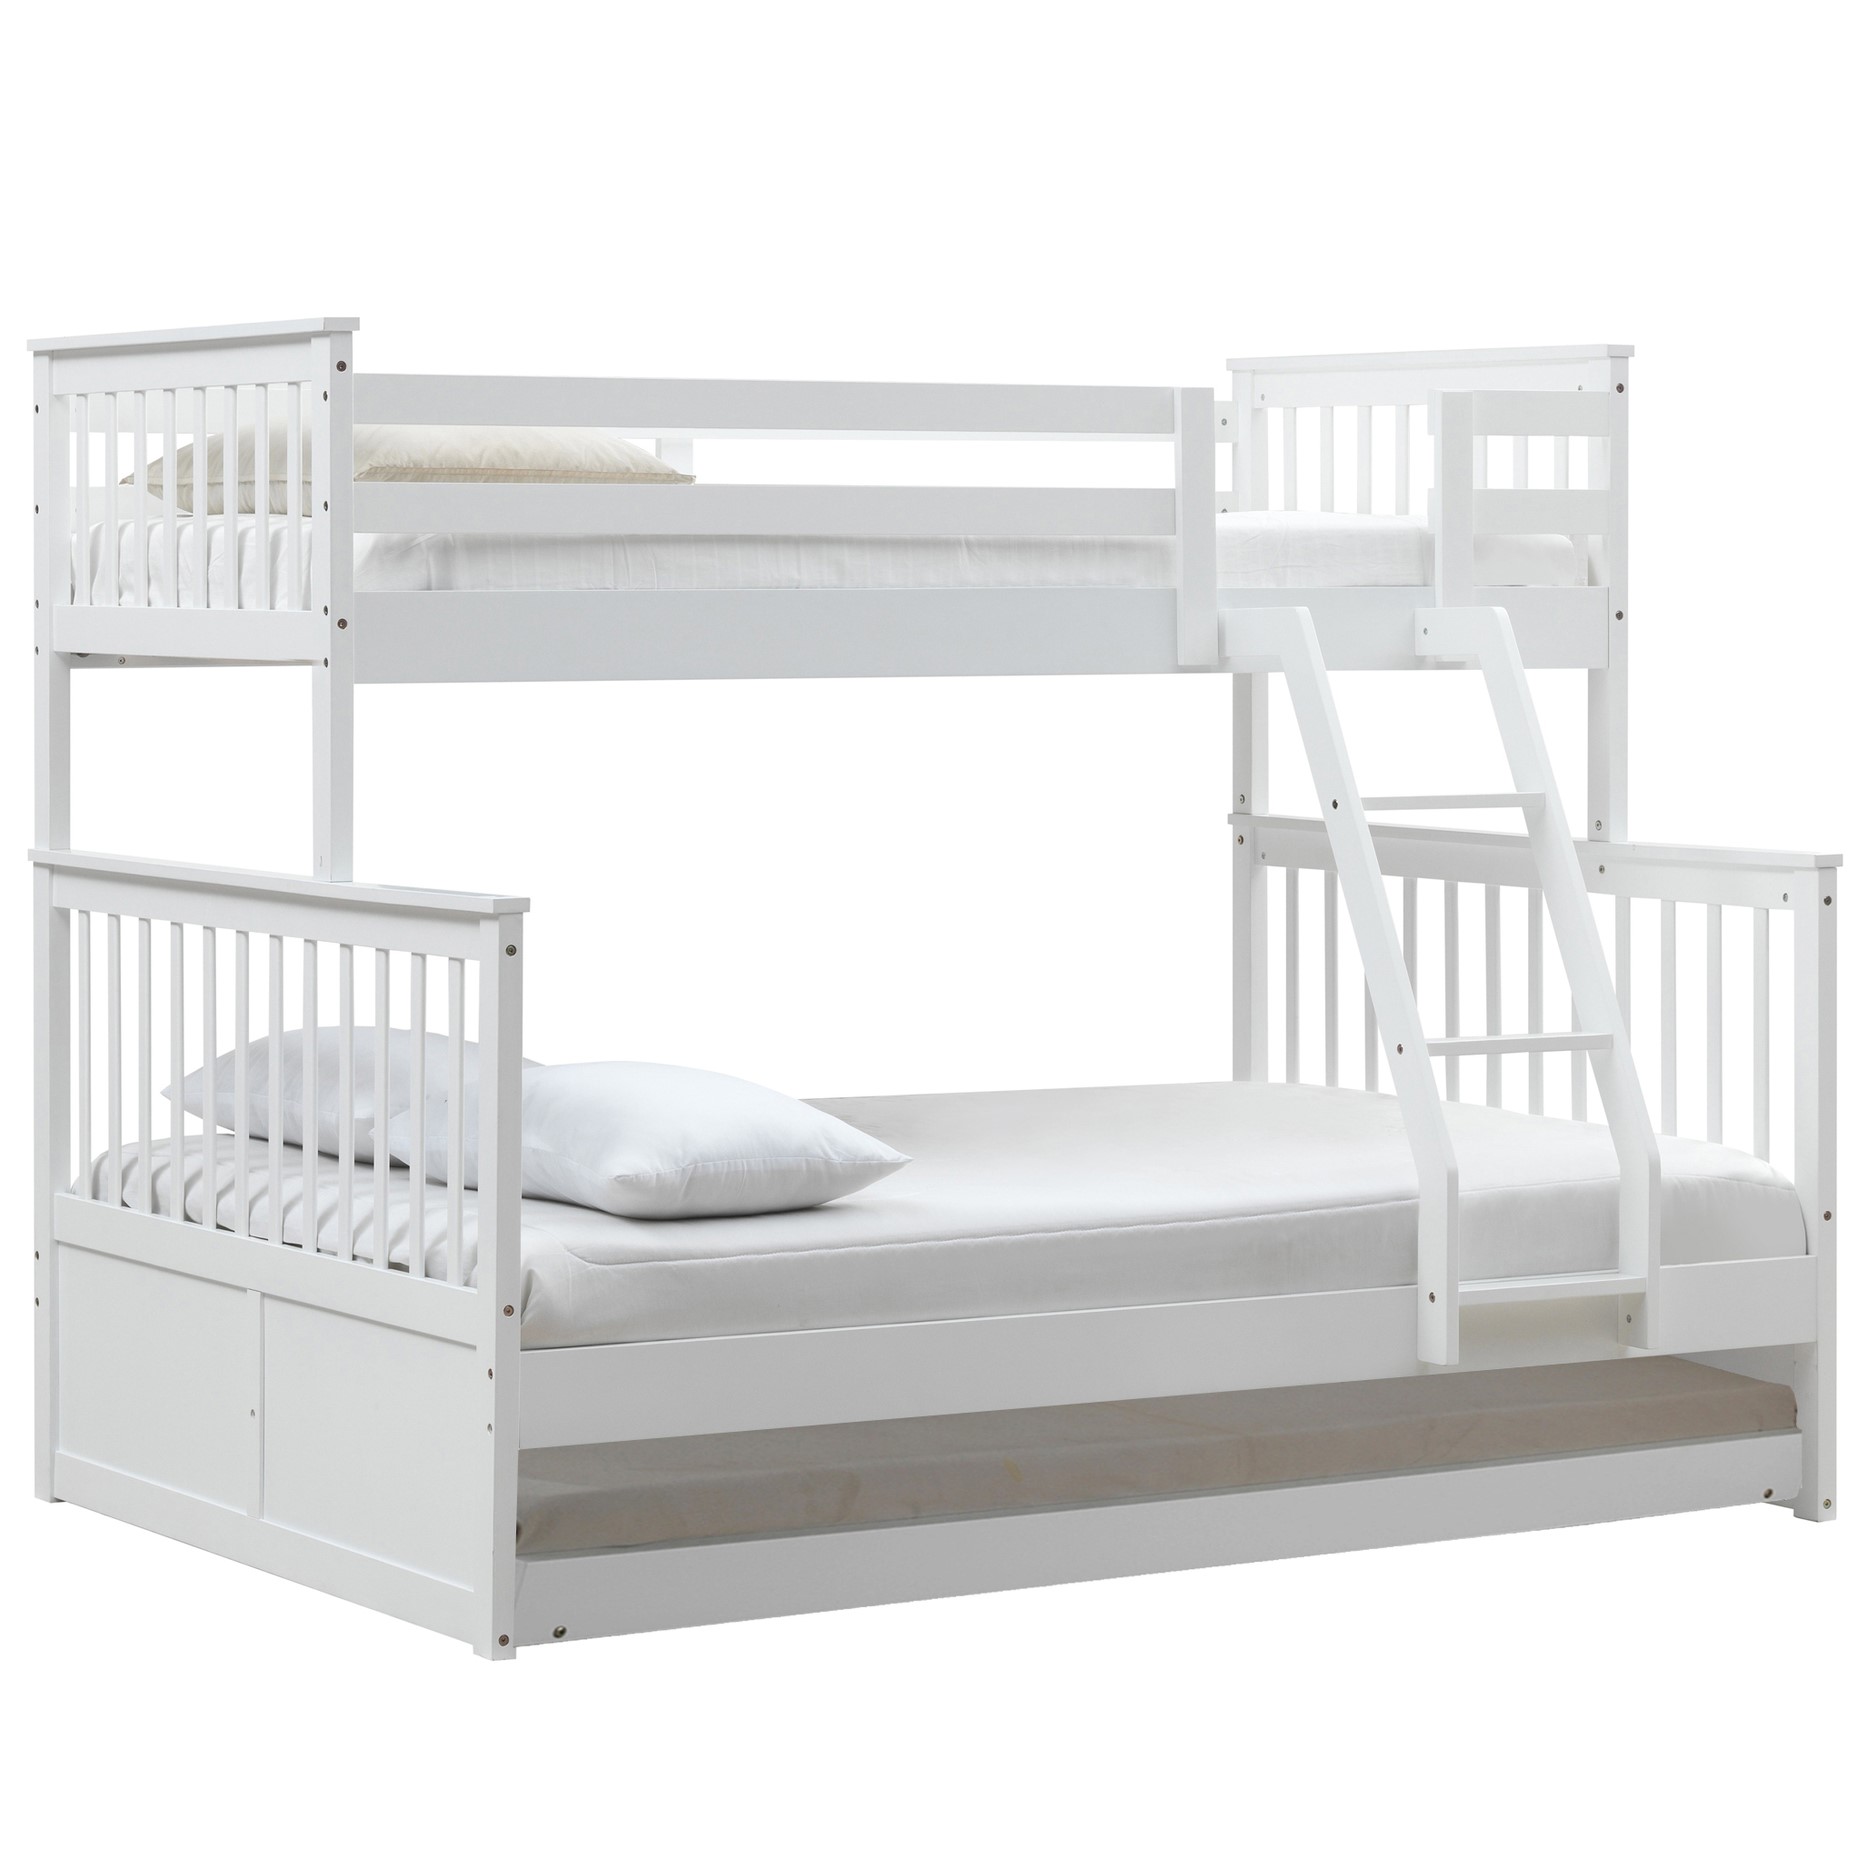 Avery Single Over Double Bunk Bed, Avery Bunk Bed